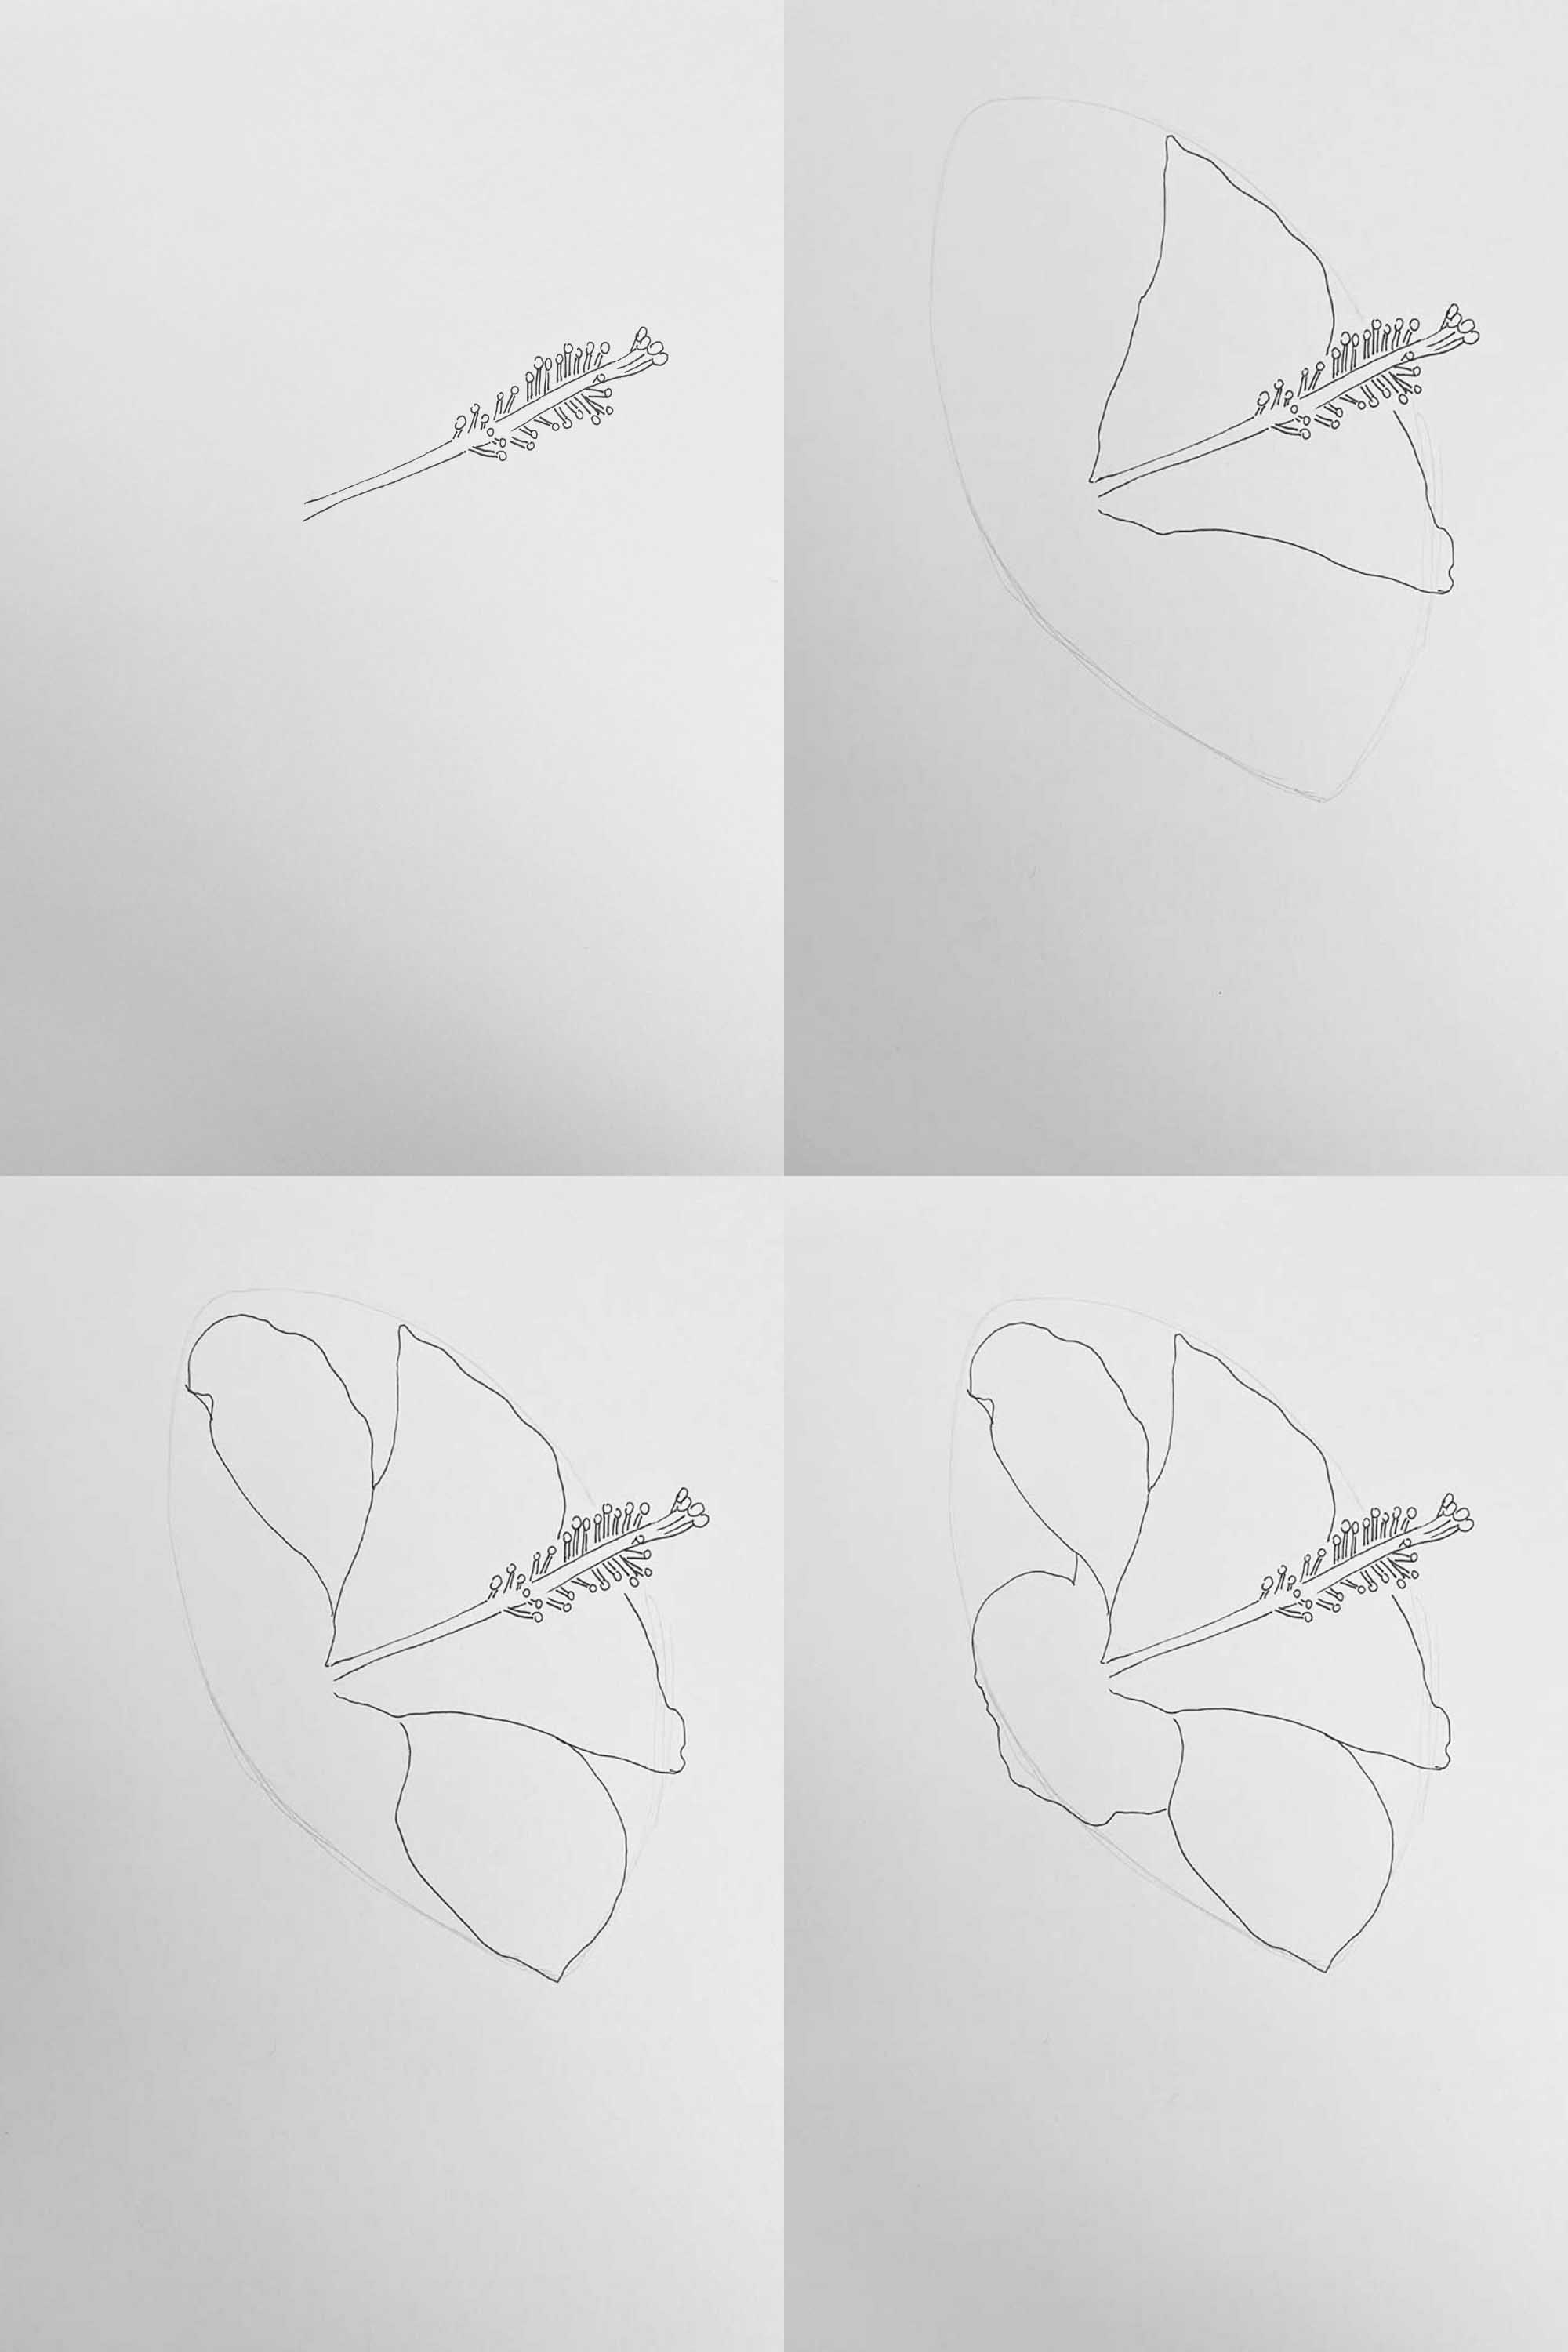 Chinese Hibiscus drawing steps